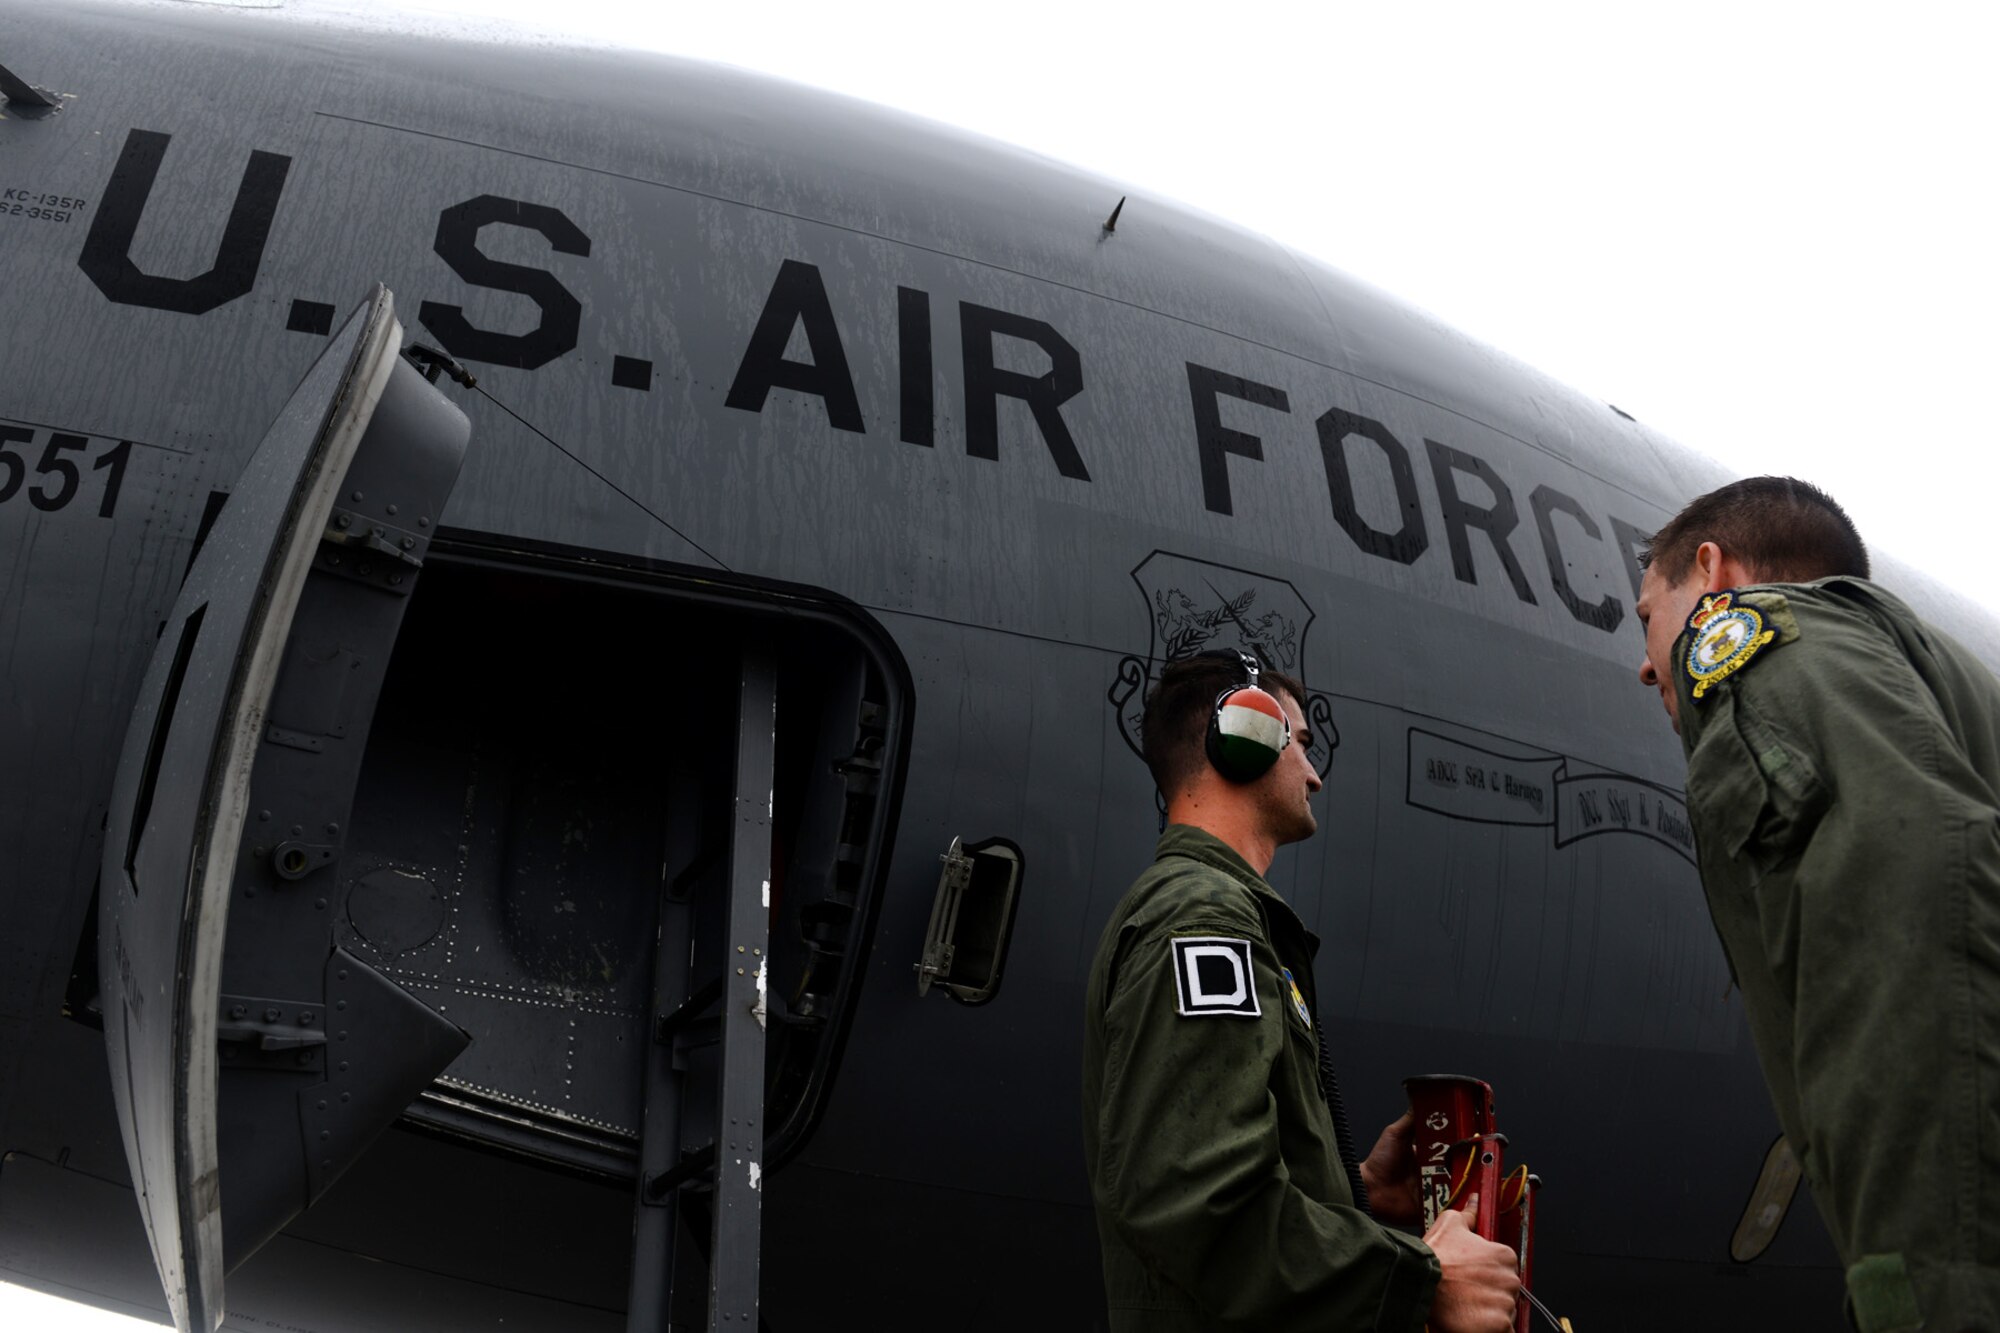 U.S. Air Force Benjamin Kline, right, 100th Air Refueling Wing KC-135 Stratotanker pilot and command post chief from Taylor, Mich., greets U.S. Air Force Senior Airman Justin Estergard, 100th Maintenance Squadron KC-135 Stratotanker crew chief from Callaway, Neb., after landing June 24, 2015, during air refueling familiarization training on Kecskemét air base, Hungary. Hungarian, U.S. and Swedish air force personnel met for a two-week familiarization period enabling the Hungarian JAS-39 Gripen pilots to successfully perform air refueling for the first time. (U.S. Air Force photo by Senior Airman Kate Thornton/Released)